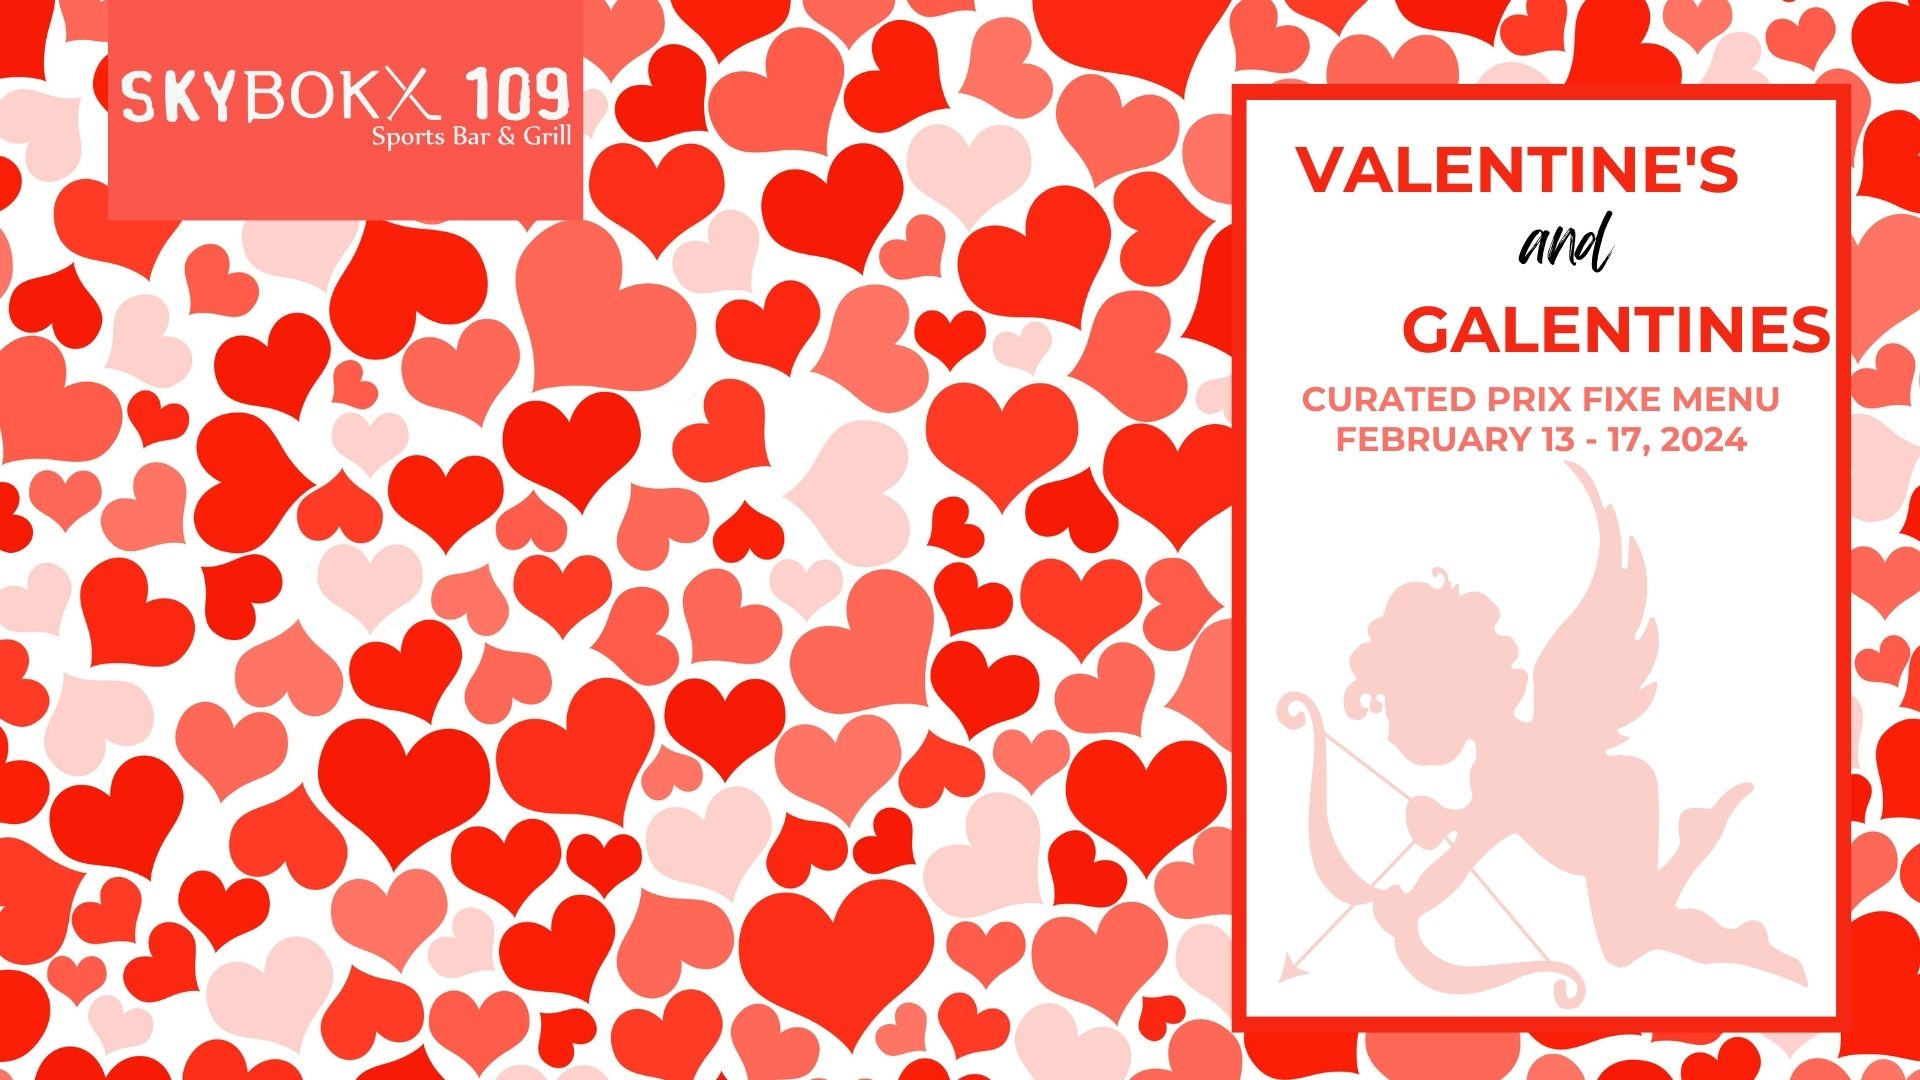 promo for galentines and valentines day/week